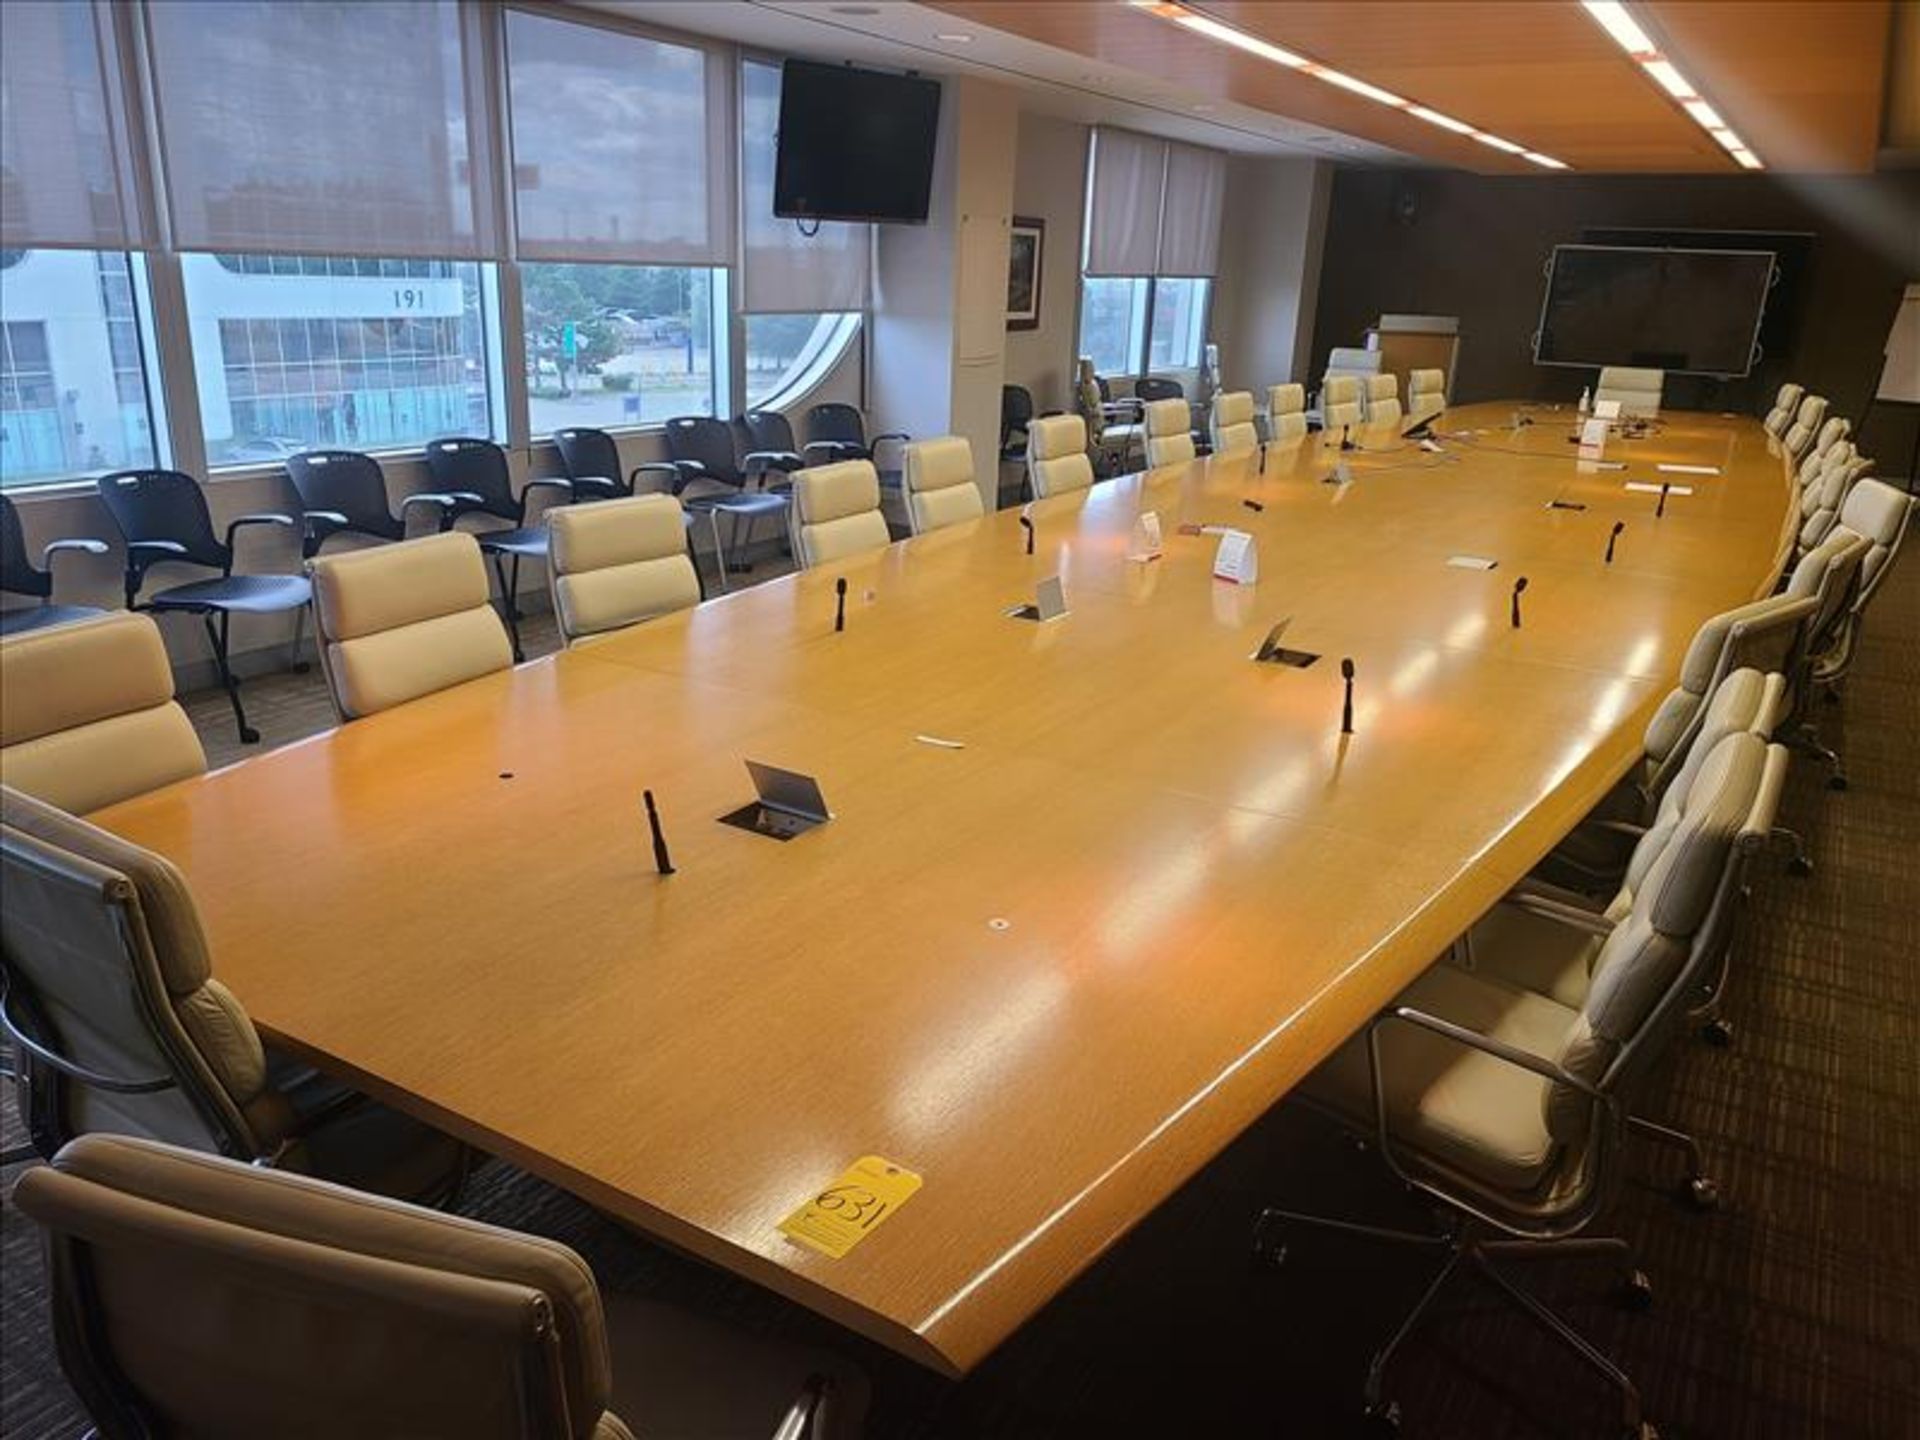 Boardroom Meeting Table approx. 40 ft. x 9 ft., (Qty 1) (Floor 3) (Boardroom 302)